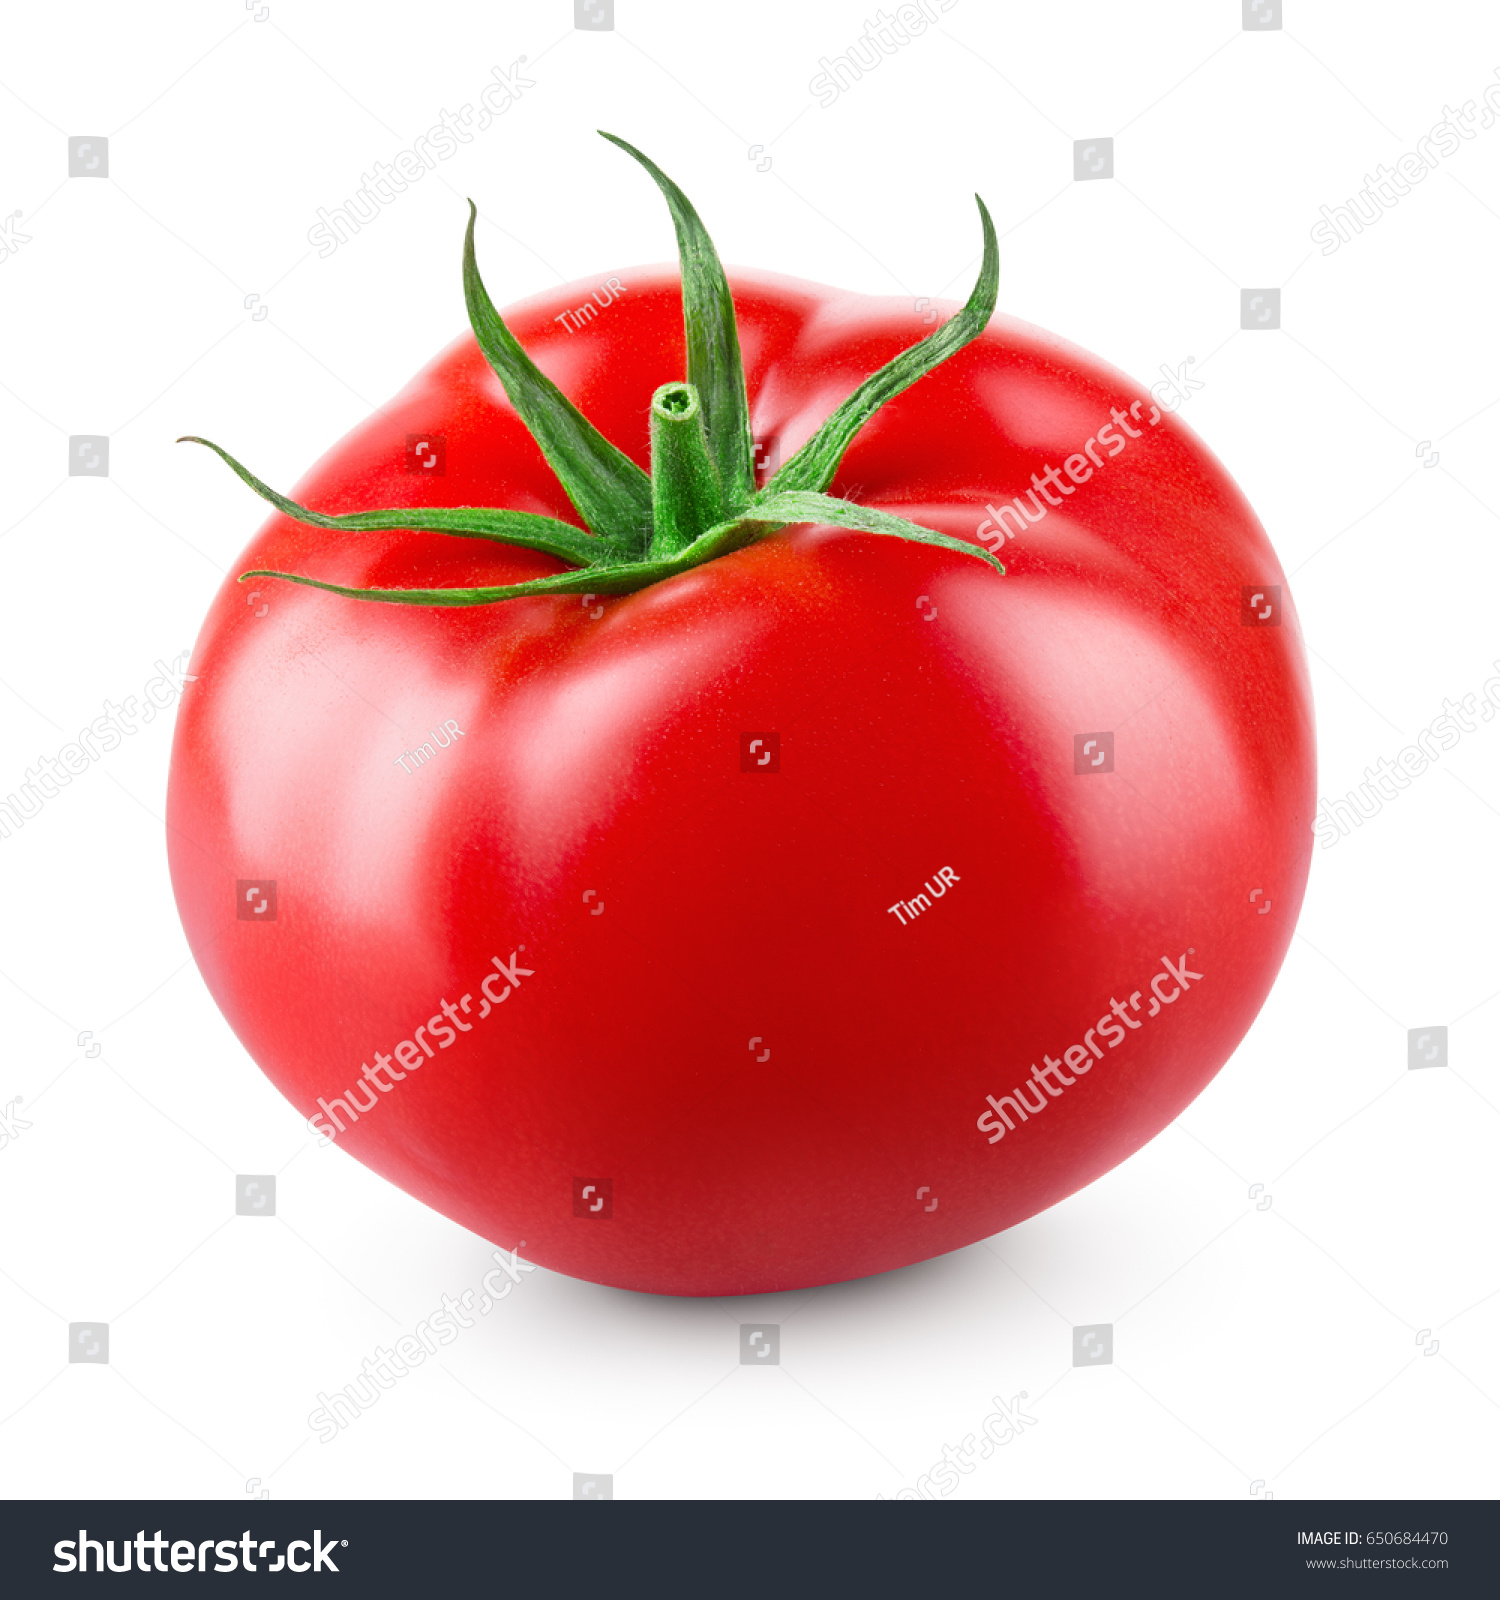 Tomato isolated on white background. With clipping path. Full depth of field. #650684470